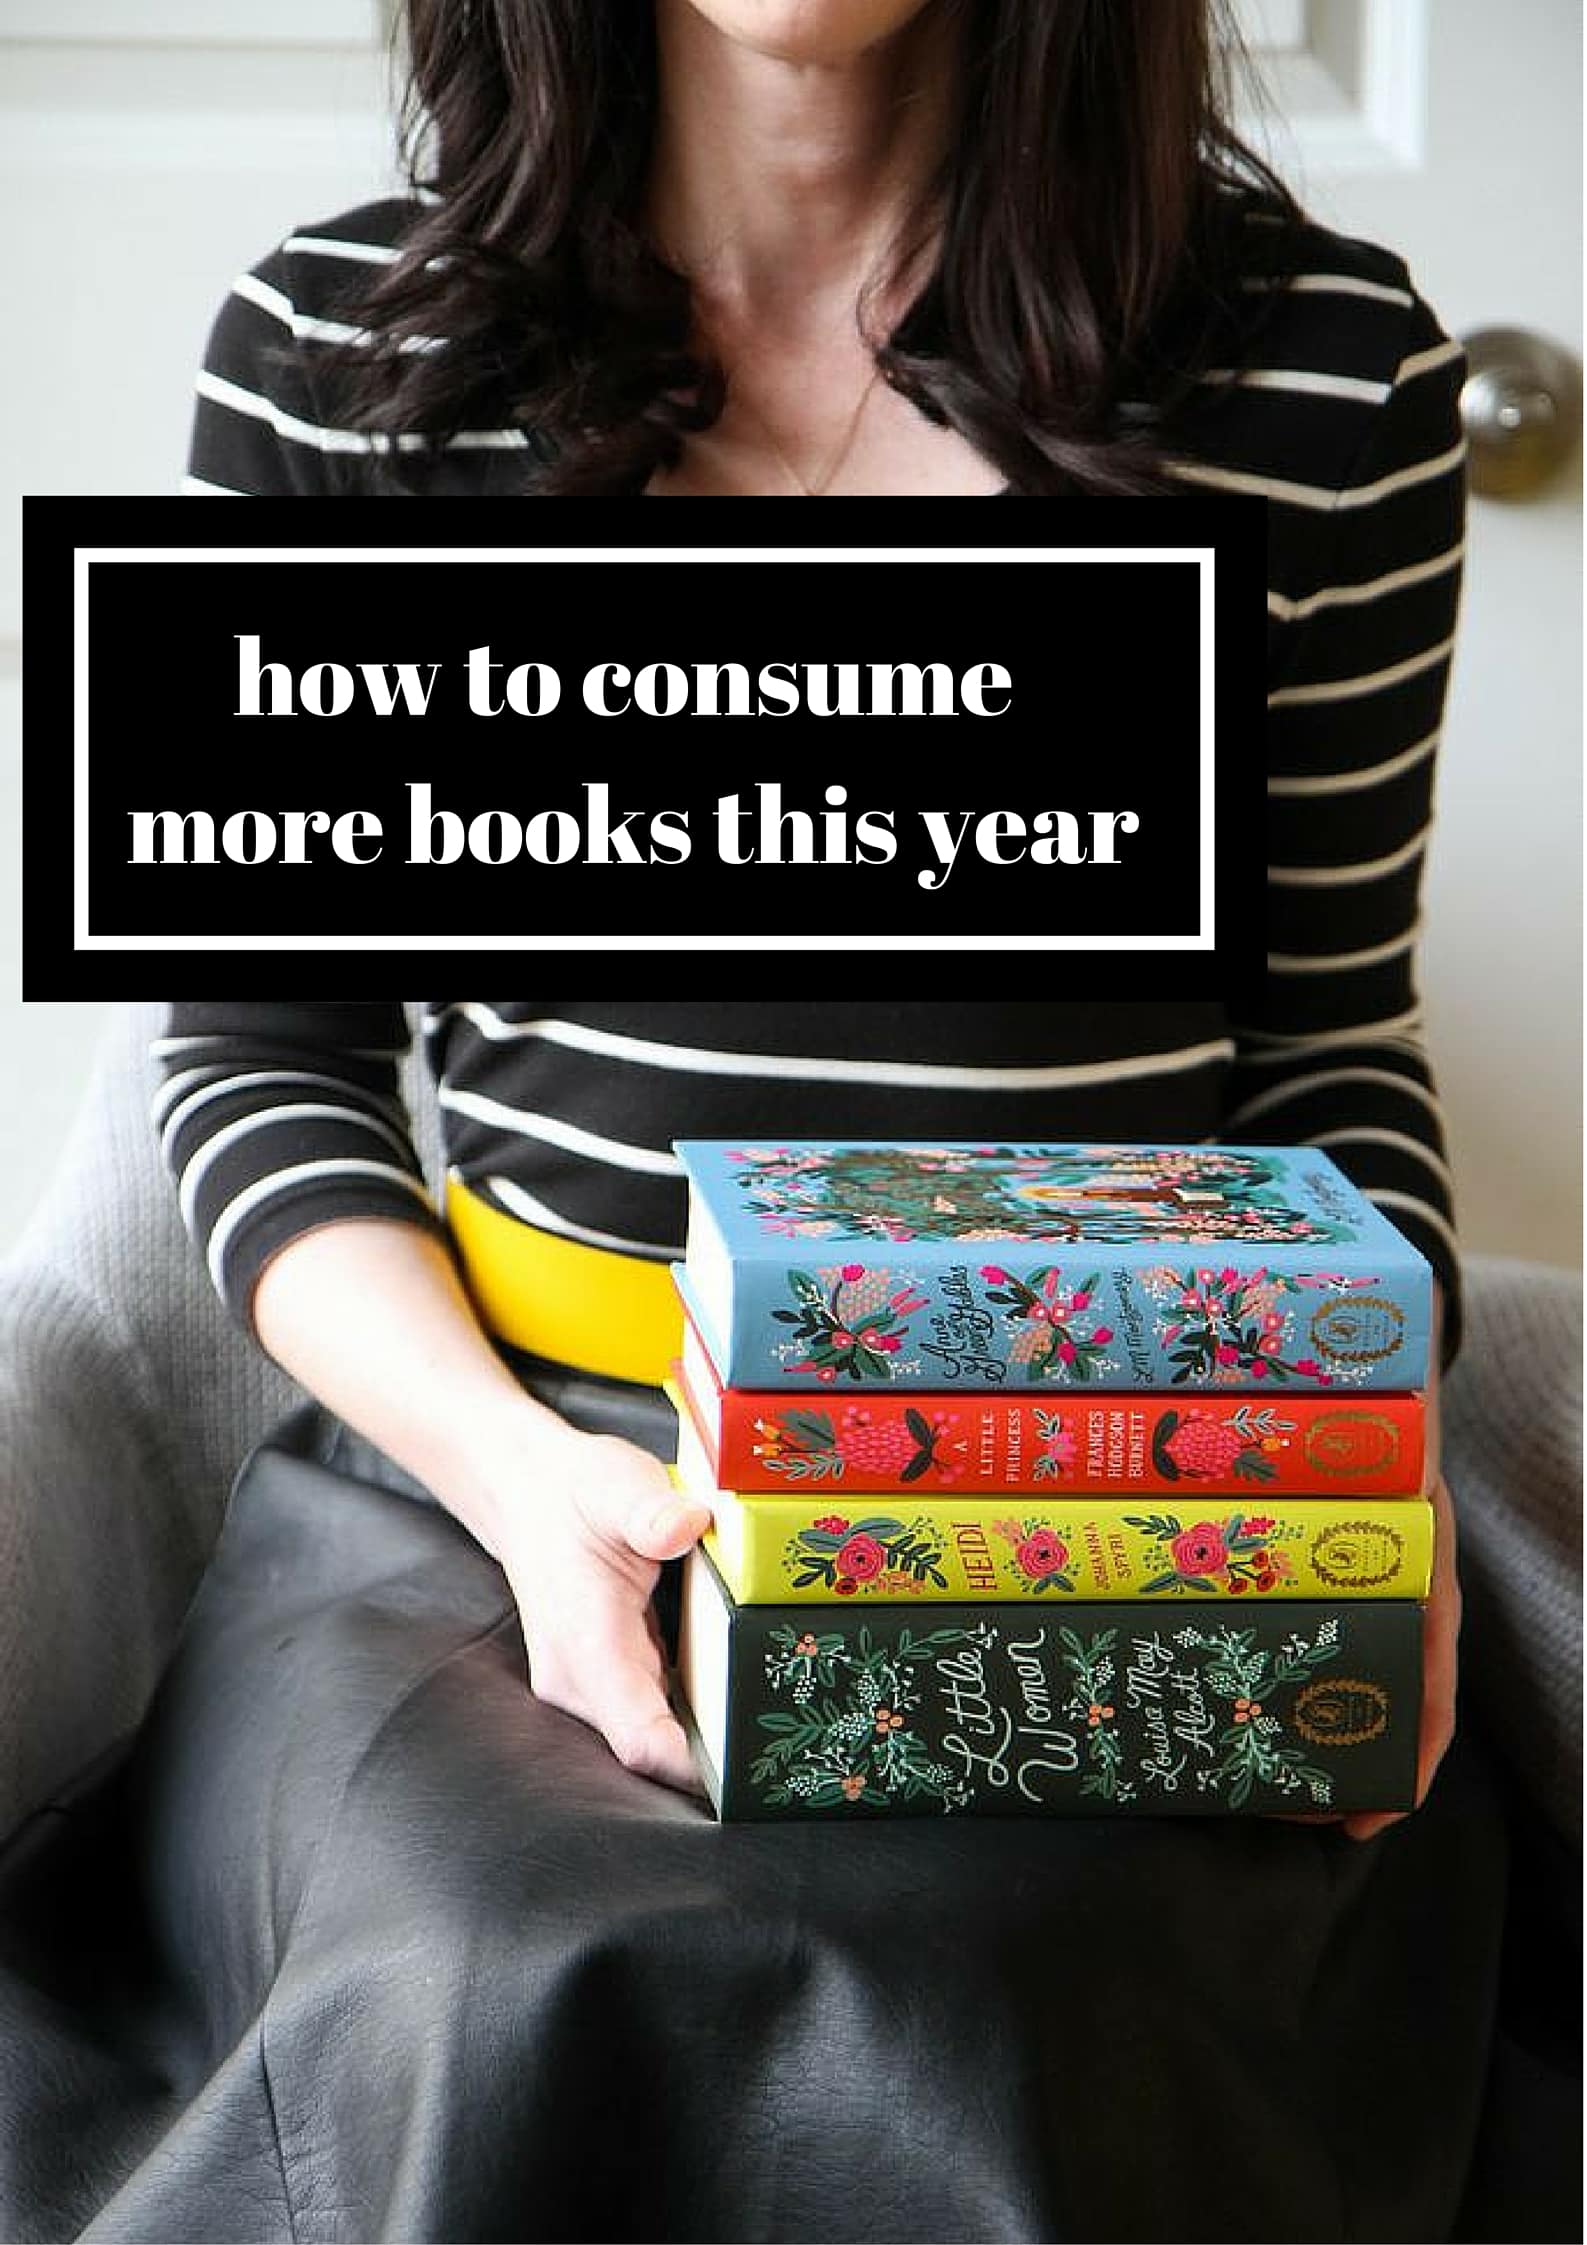 How to Consume More Books This Year from MomAdvice.com